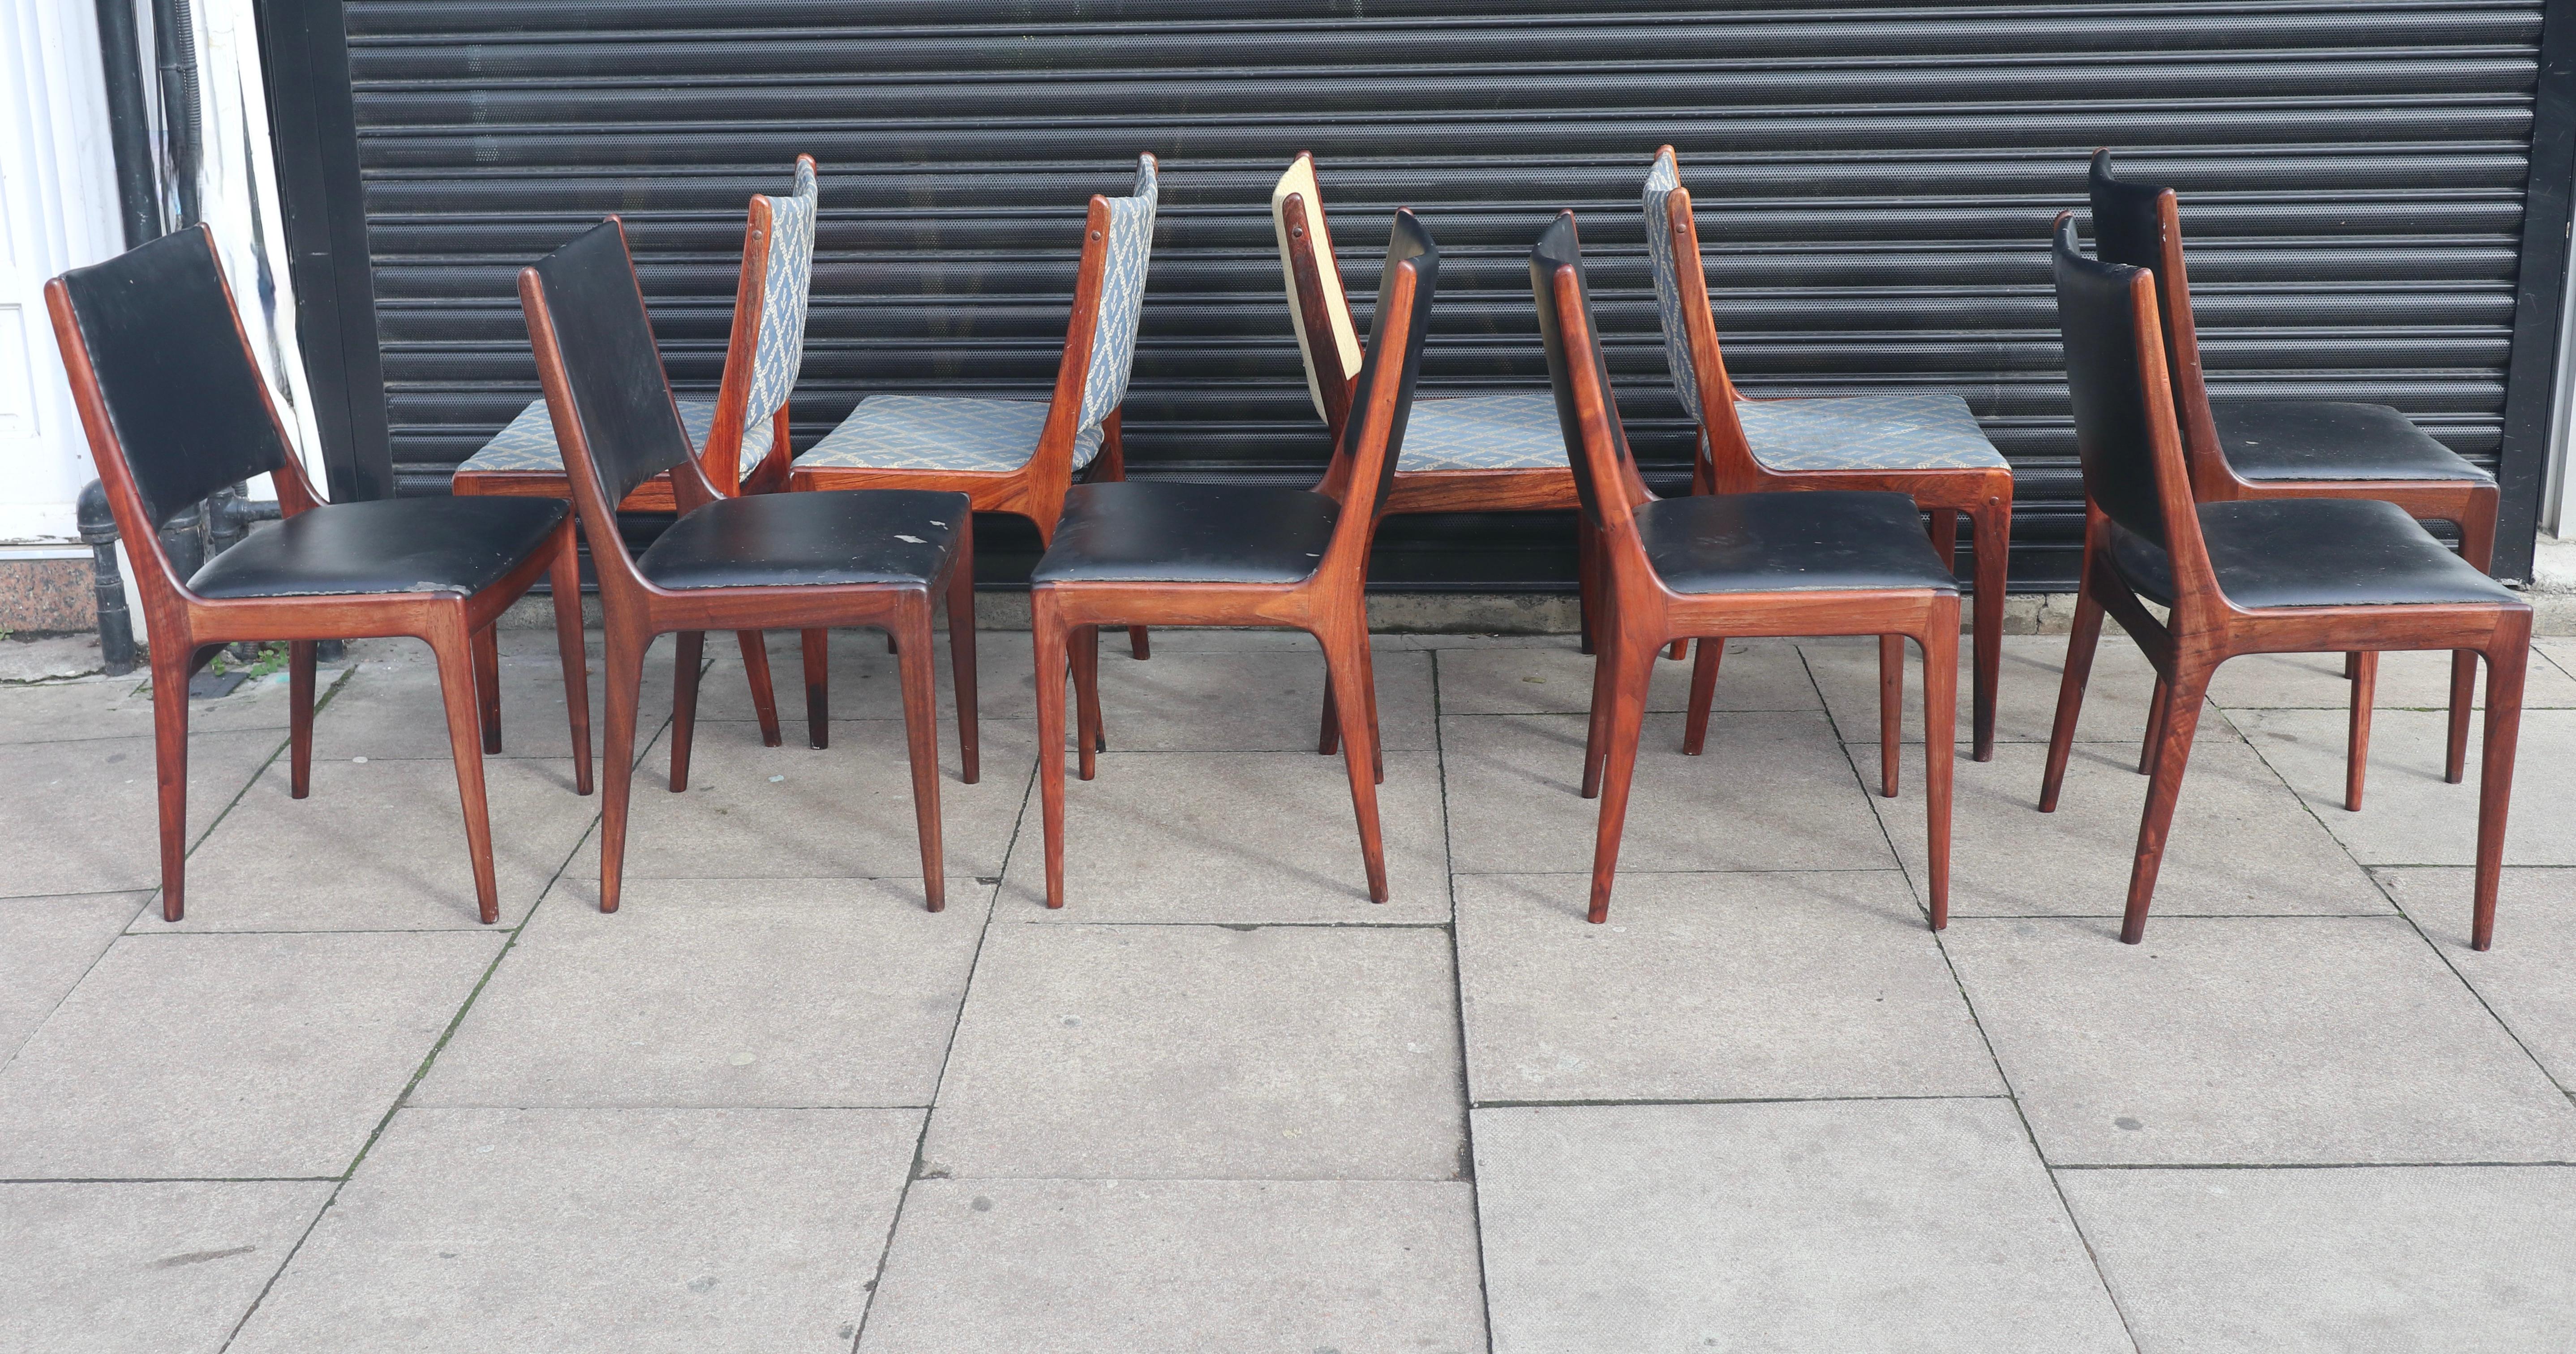 Eight vintage 1960s Teak framed dining chairs by Johannes Andersen for Uldum Møbelfabrik. The chairs have original and worn upholstery and are in need of recovering. The teak frames are in good vintage condition, and will be waxed and polished,